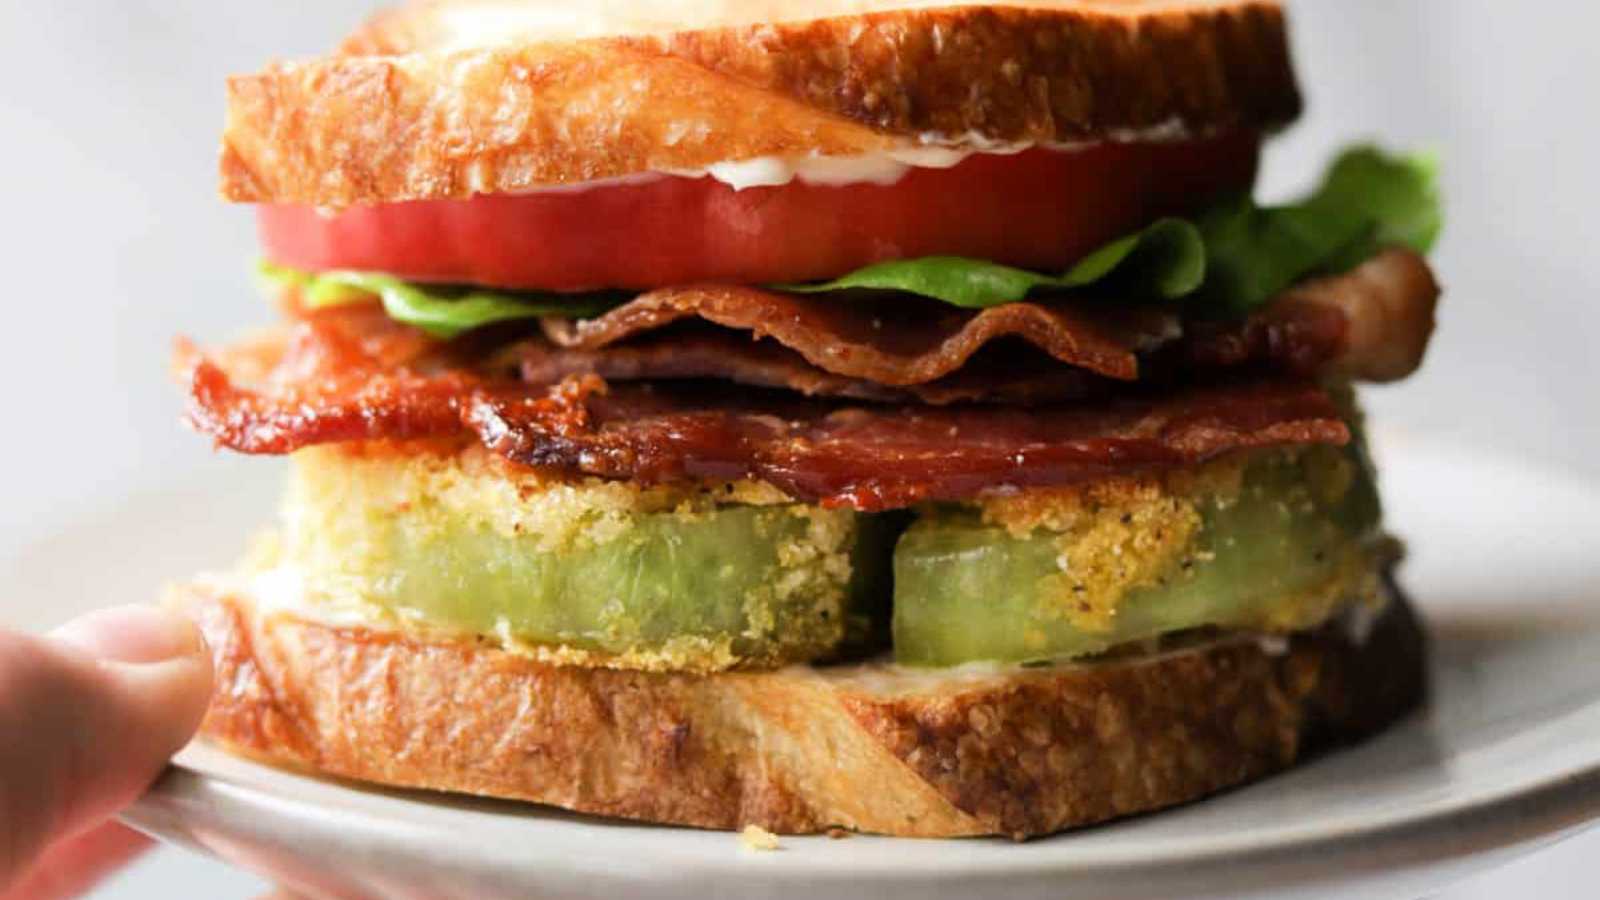 A BLT or bacon, lettuce, and tomato sandwich made with fried green tomatoes.